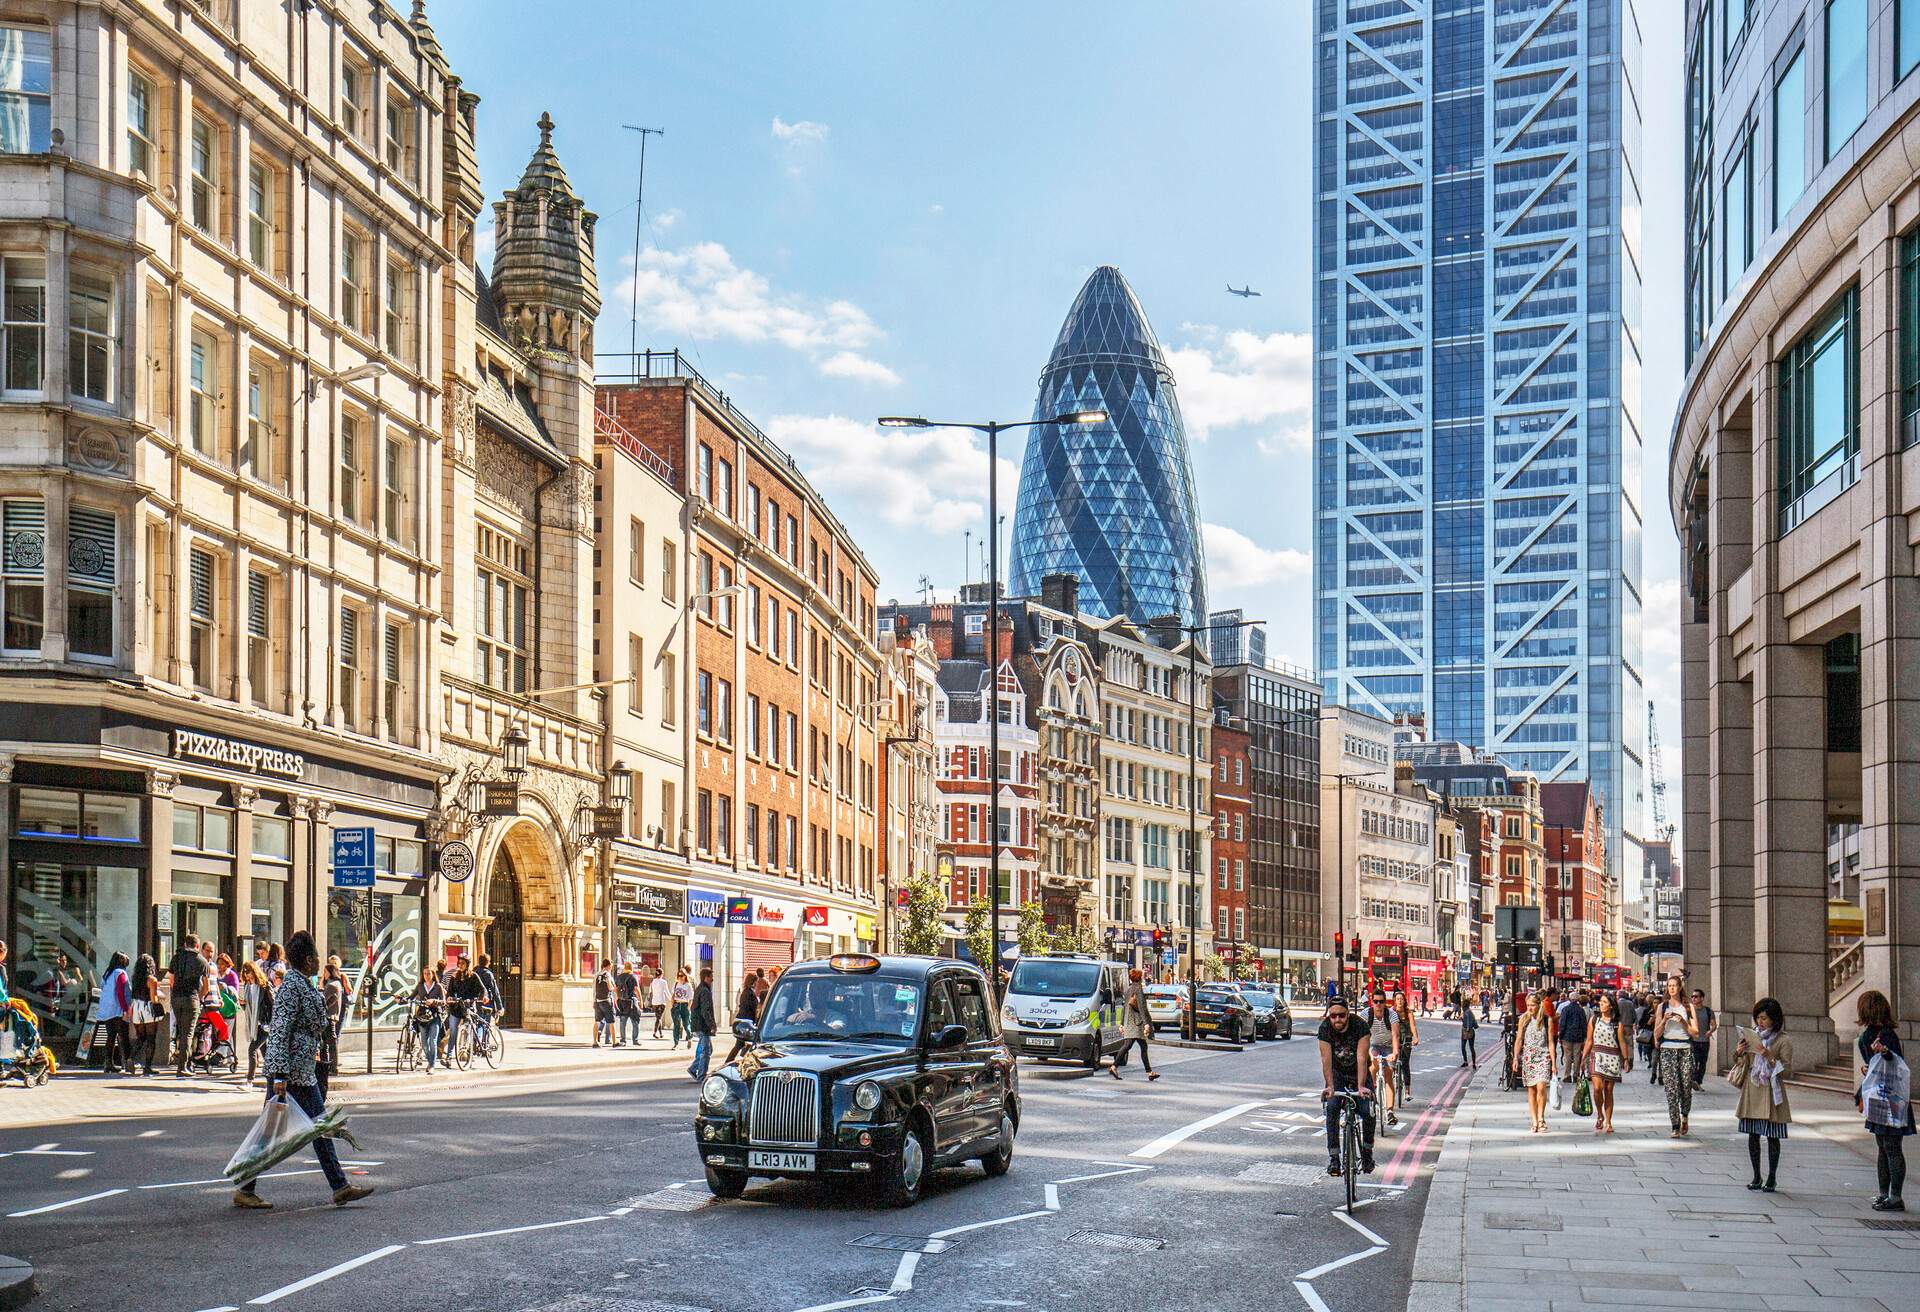 View of Bishopsgate street at the financial district of London.